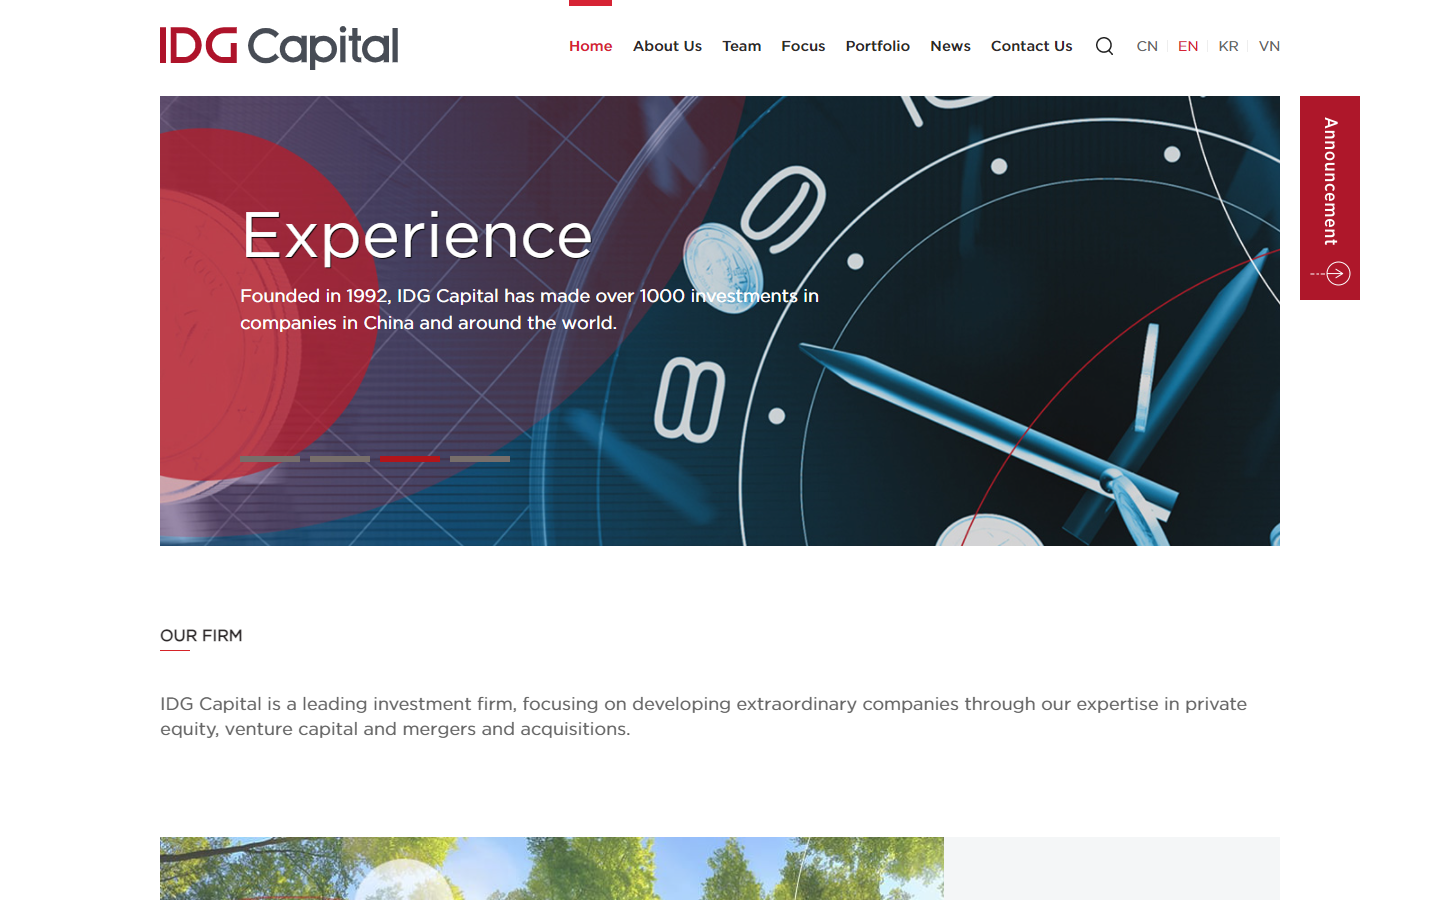 IDG Capital private equity website